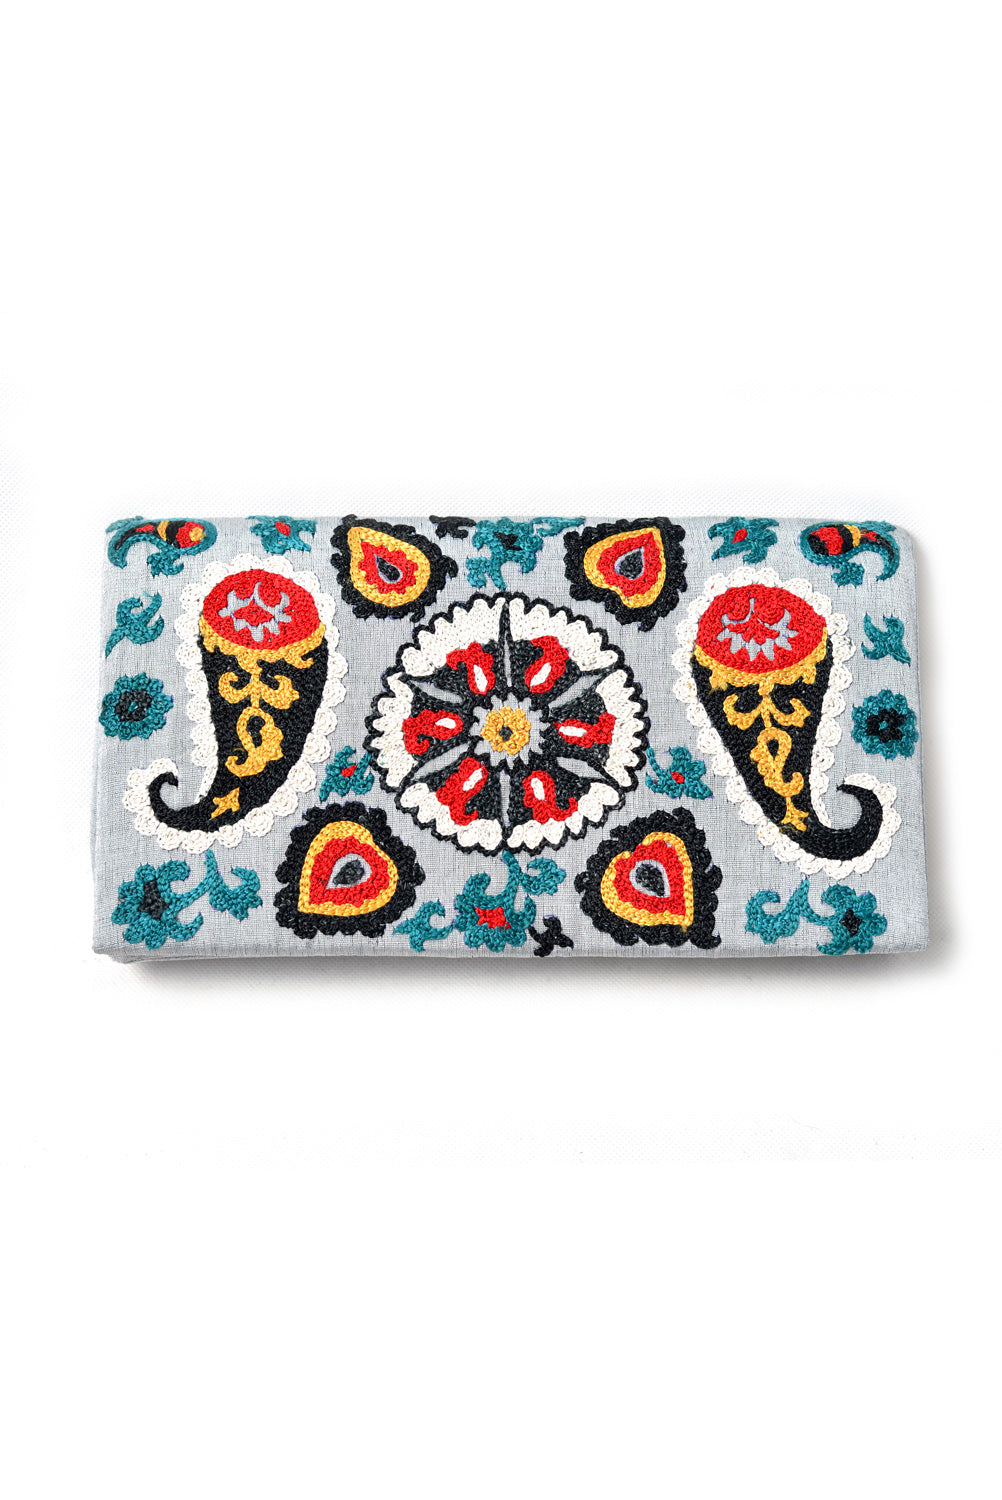 Embroidered Suzani Clutch